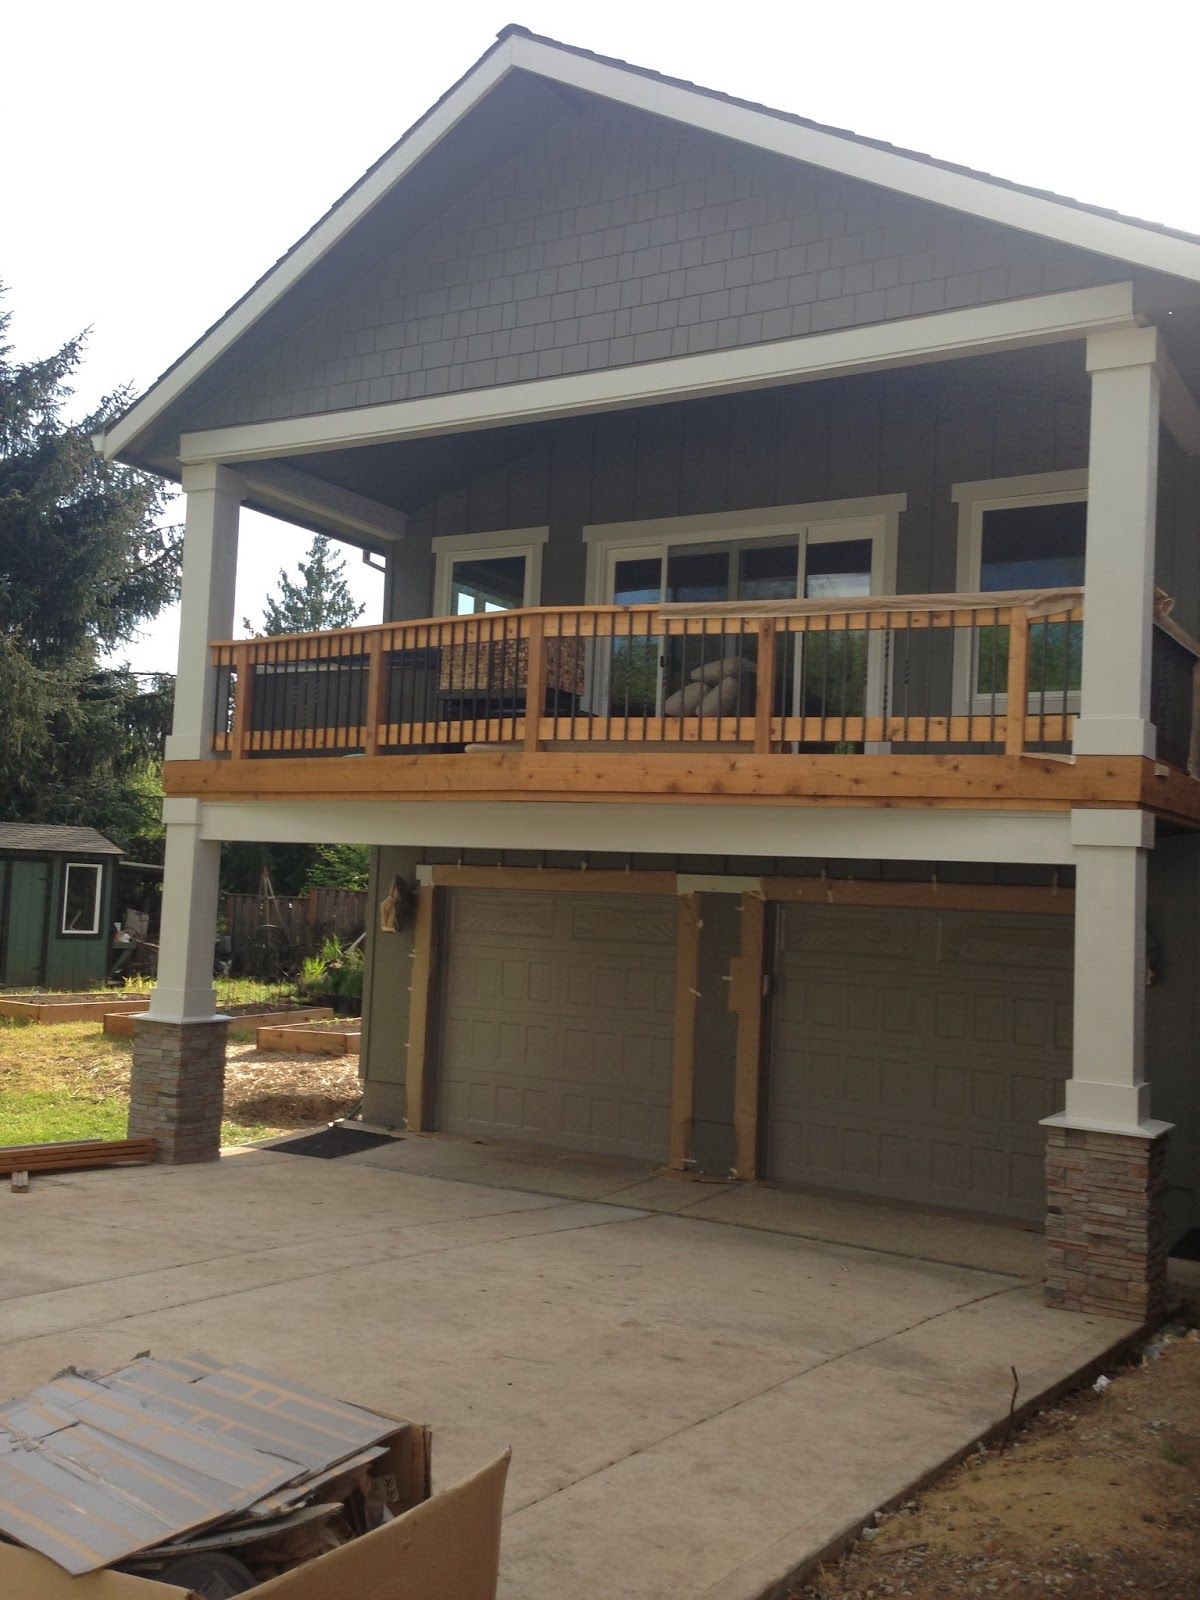 Extend The Deck Over The Garage For Extra Covered Parking Turn with size 1200 X 1600